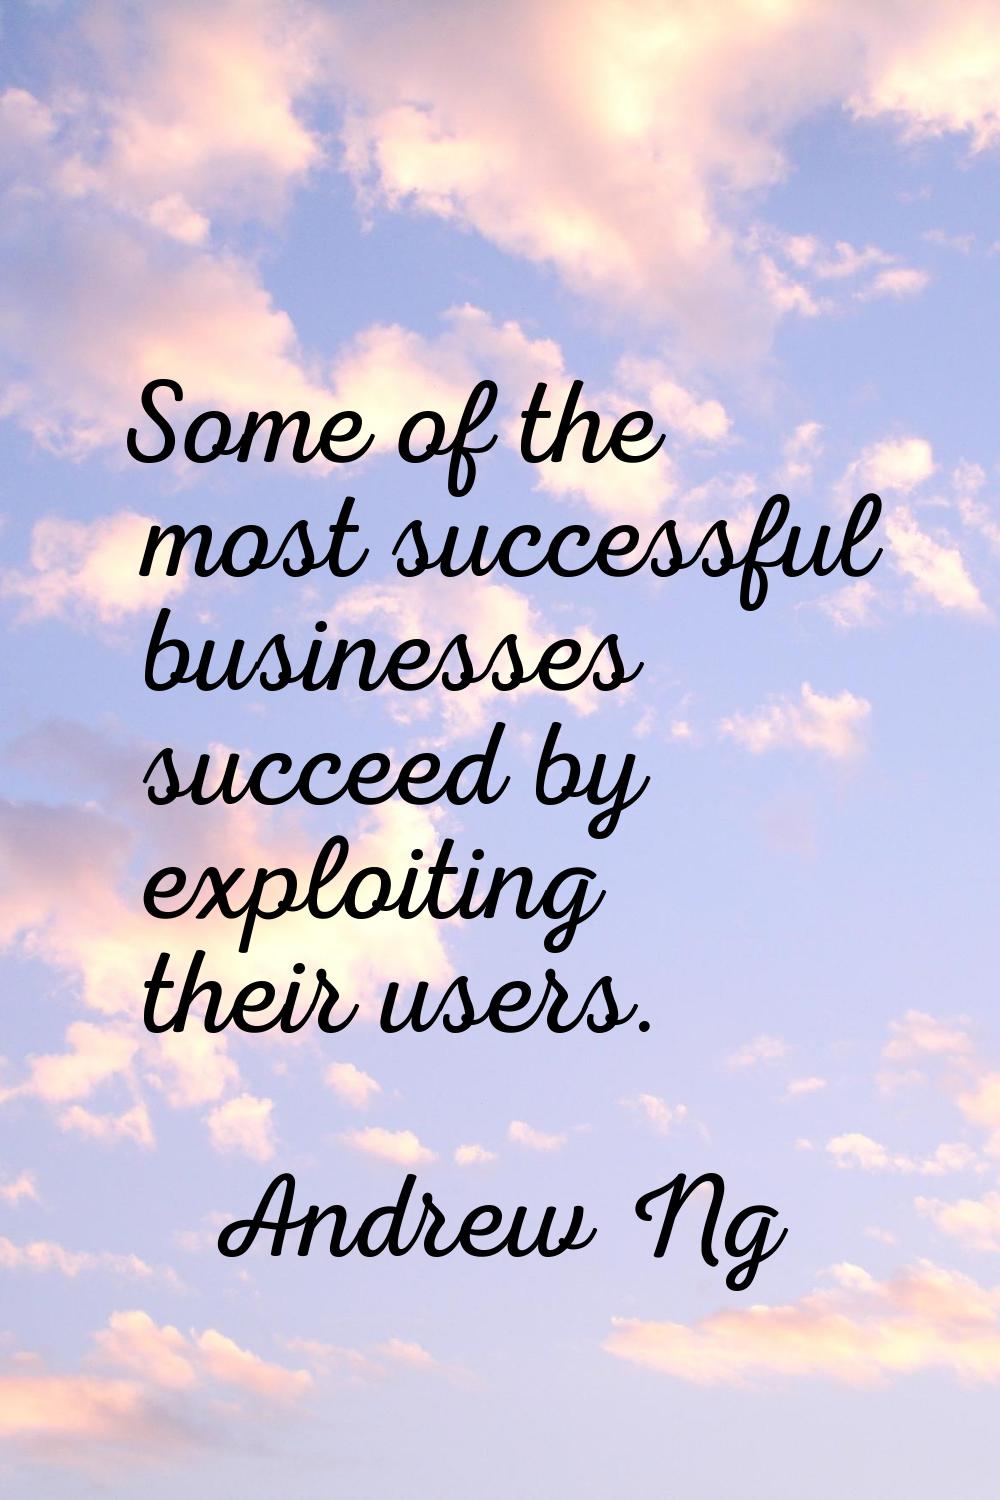 Some of the most successful businesses succeed by exploiting their users.